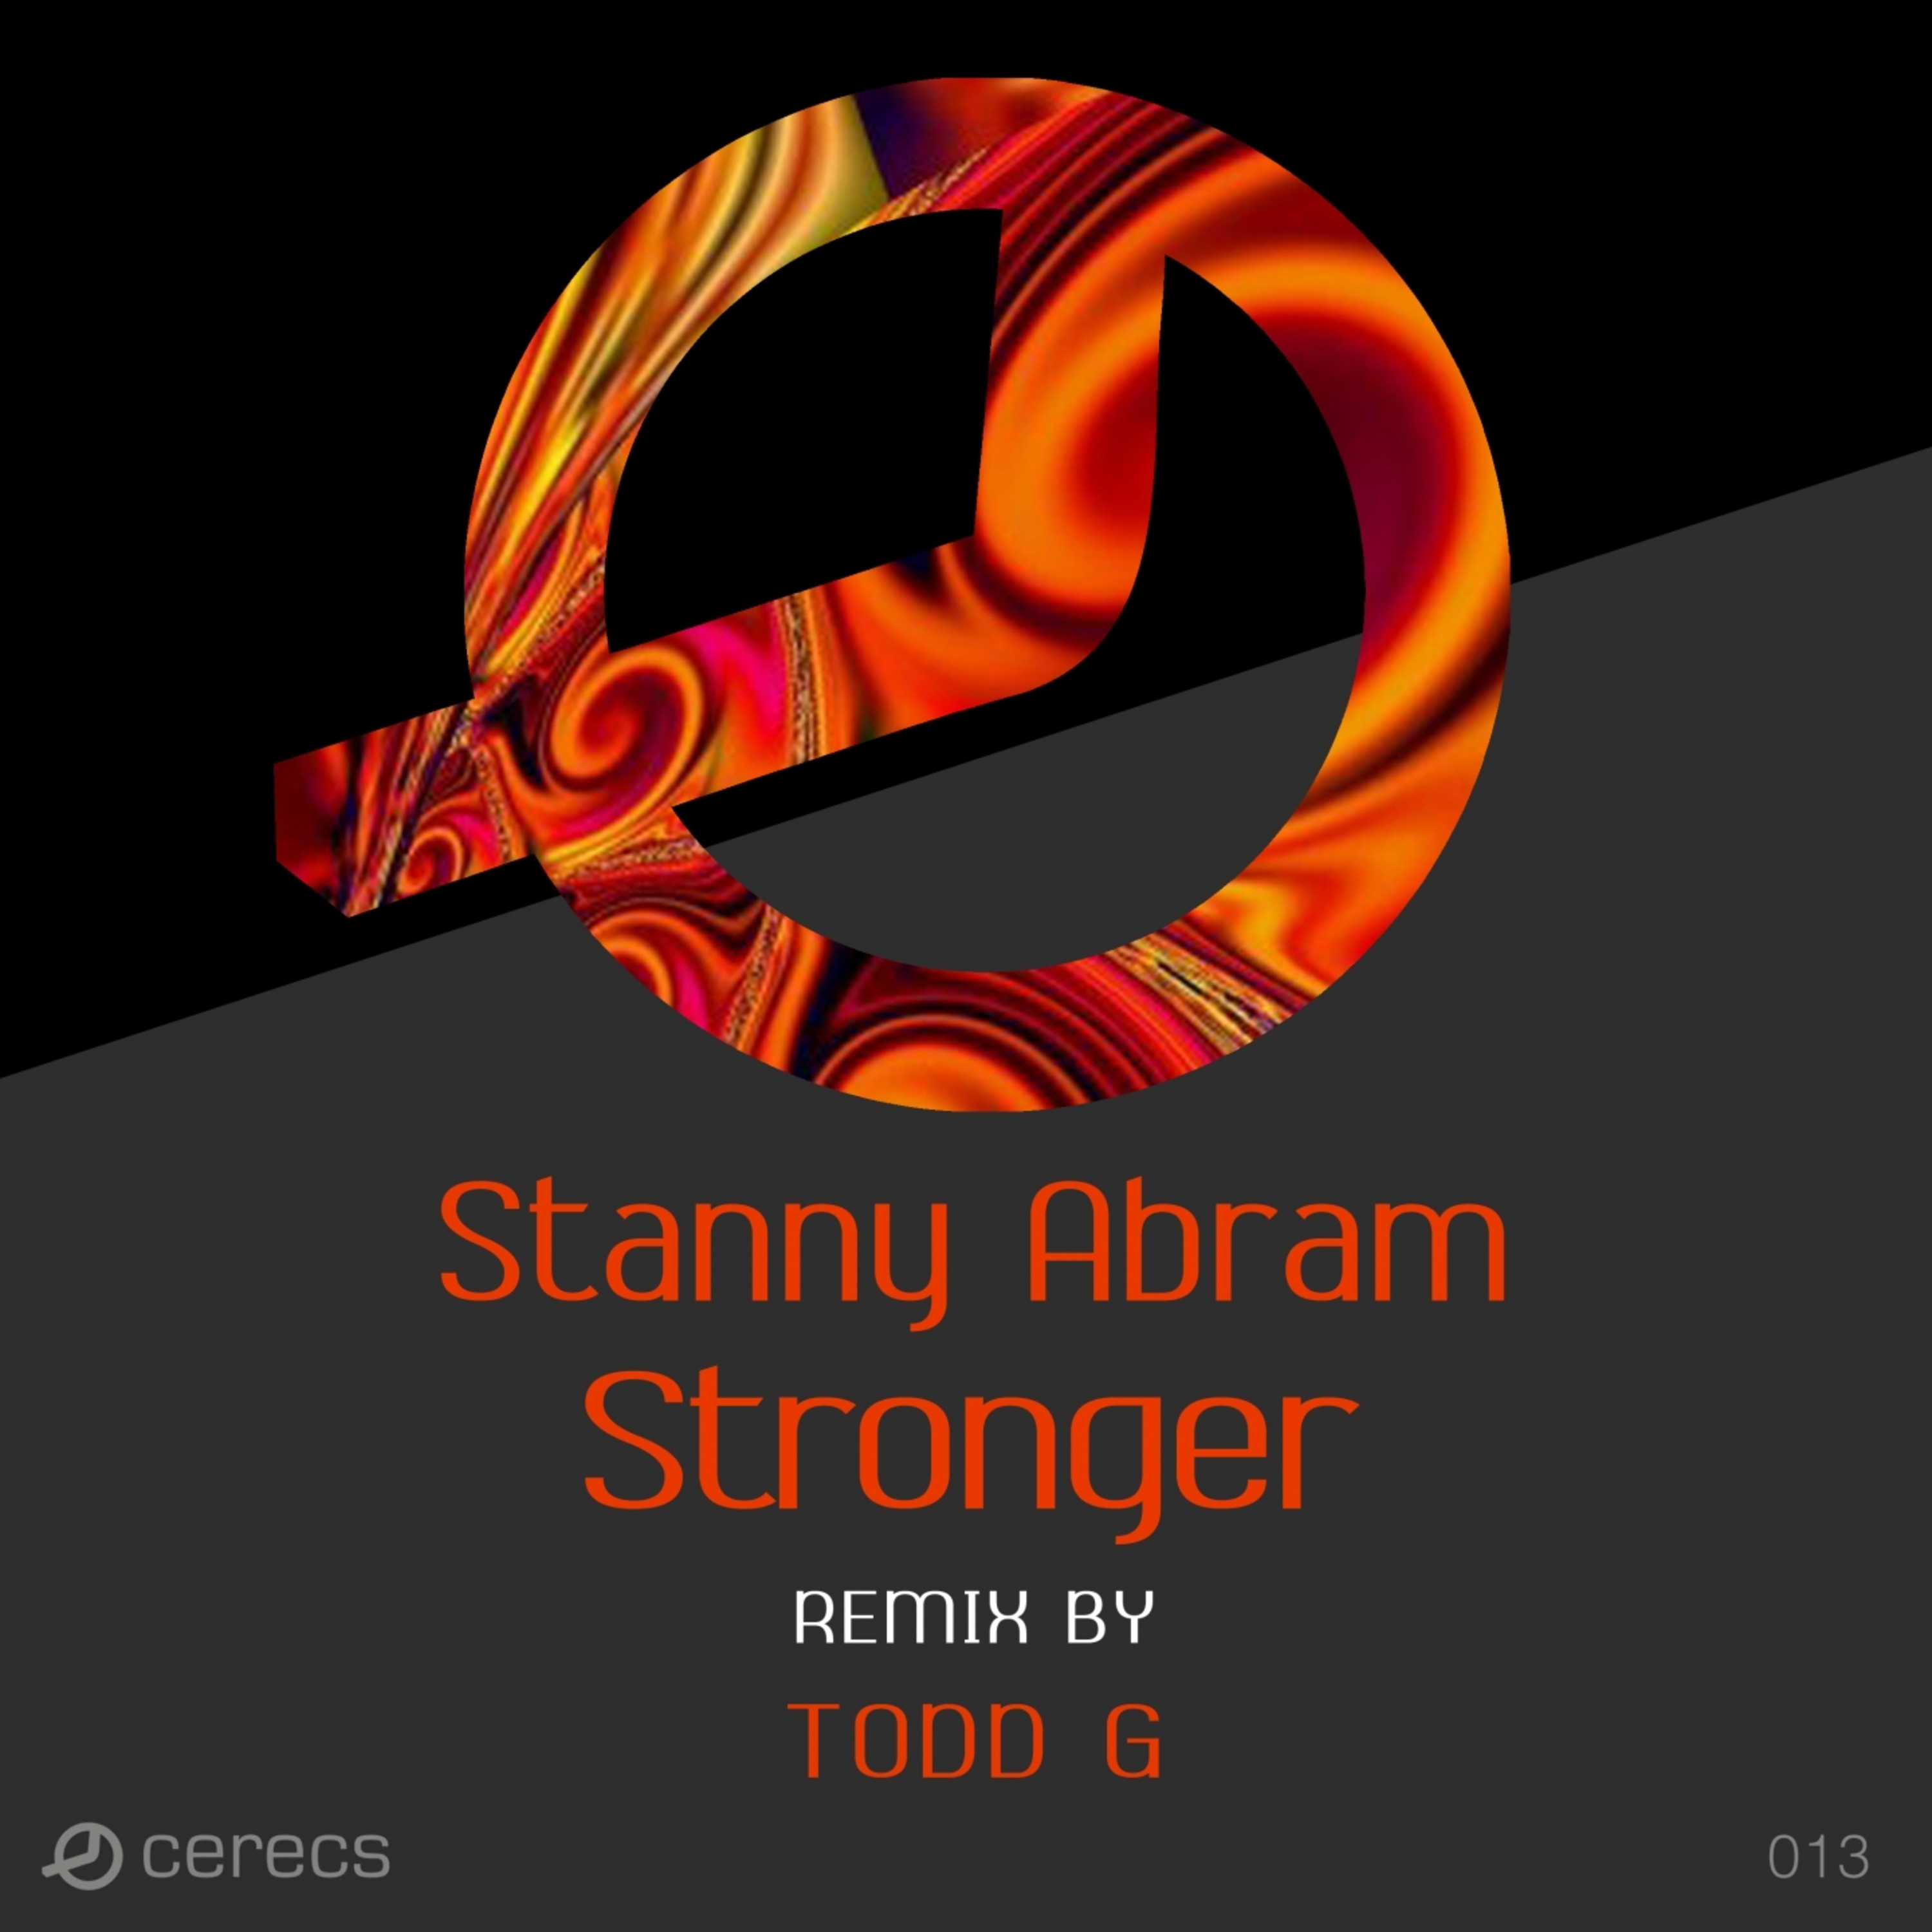 Stronger (Todd G Classic Remix)